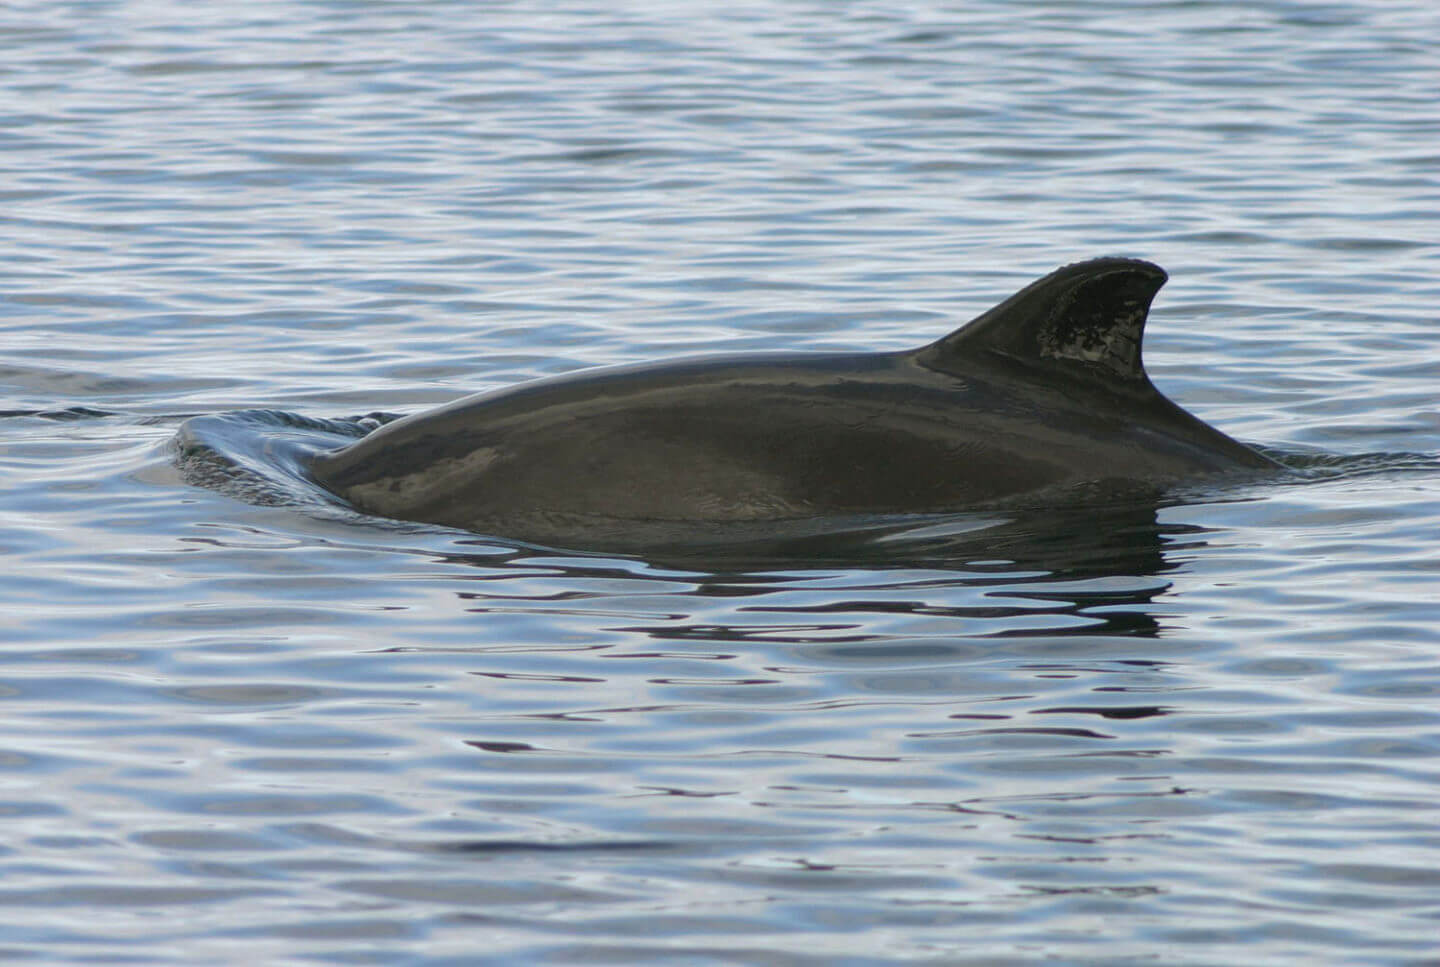 Energy firms prevented porpoise protection 6